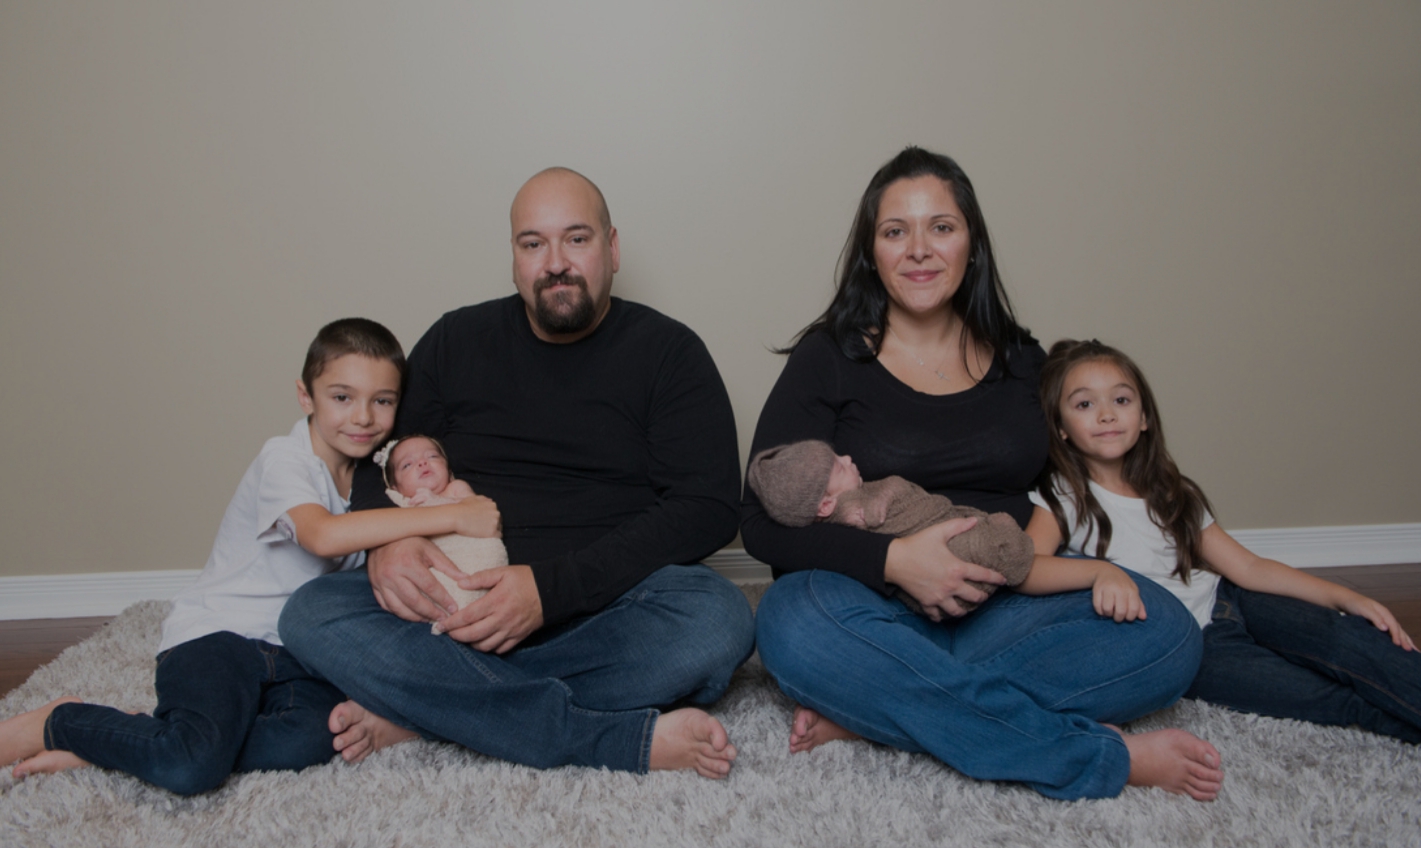 Lisa, her husband, and four children sit on the floor for a portrait.